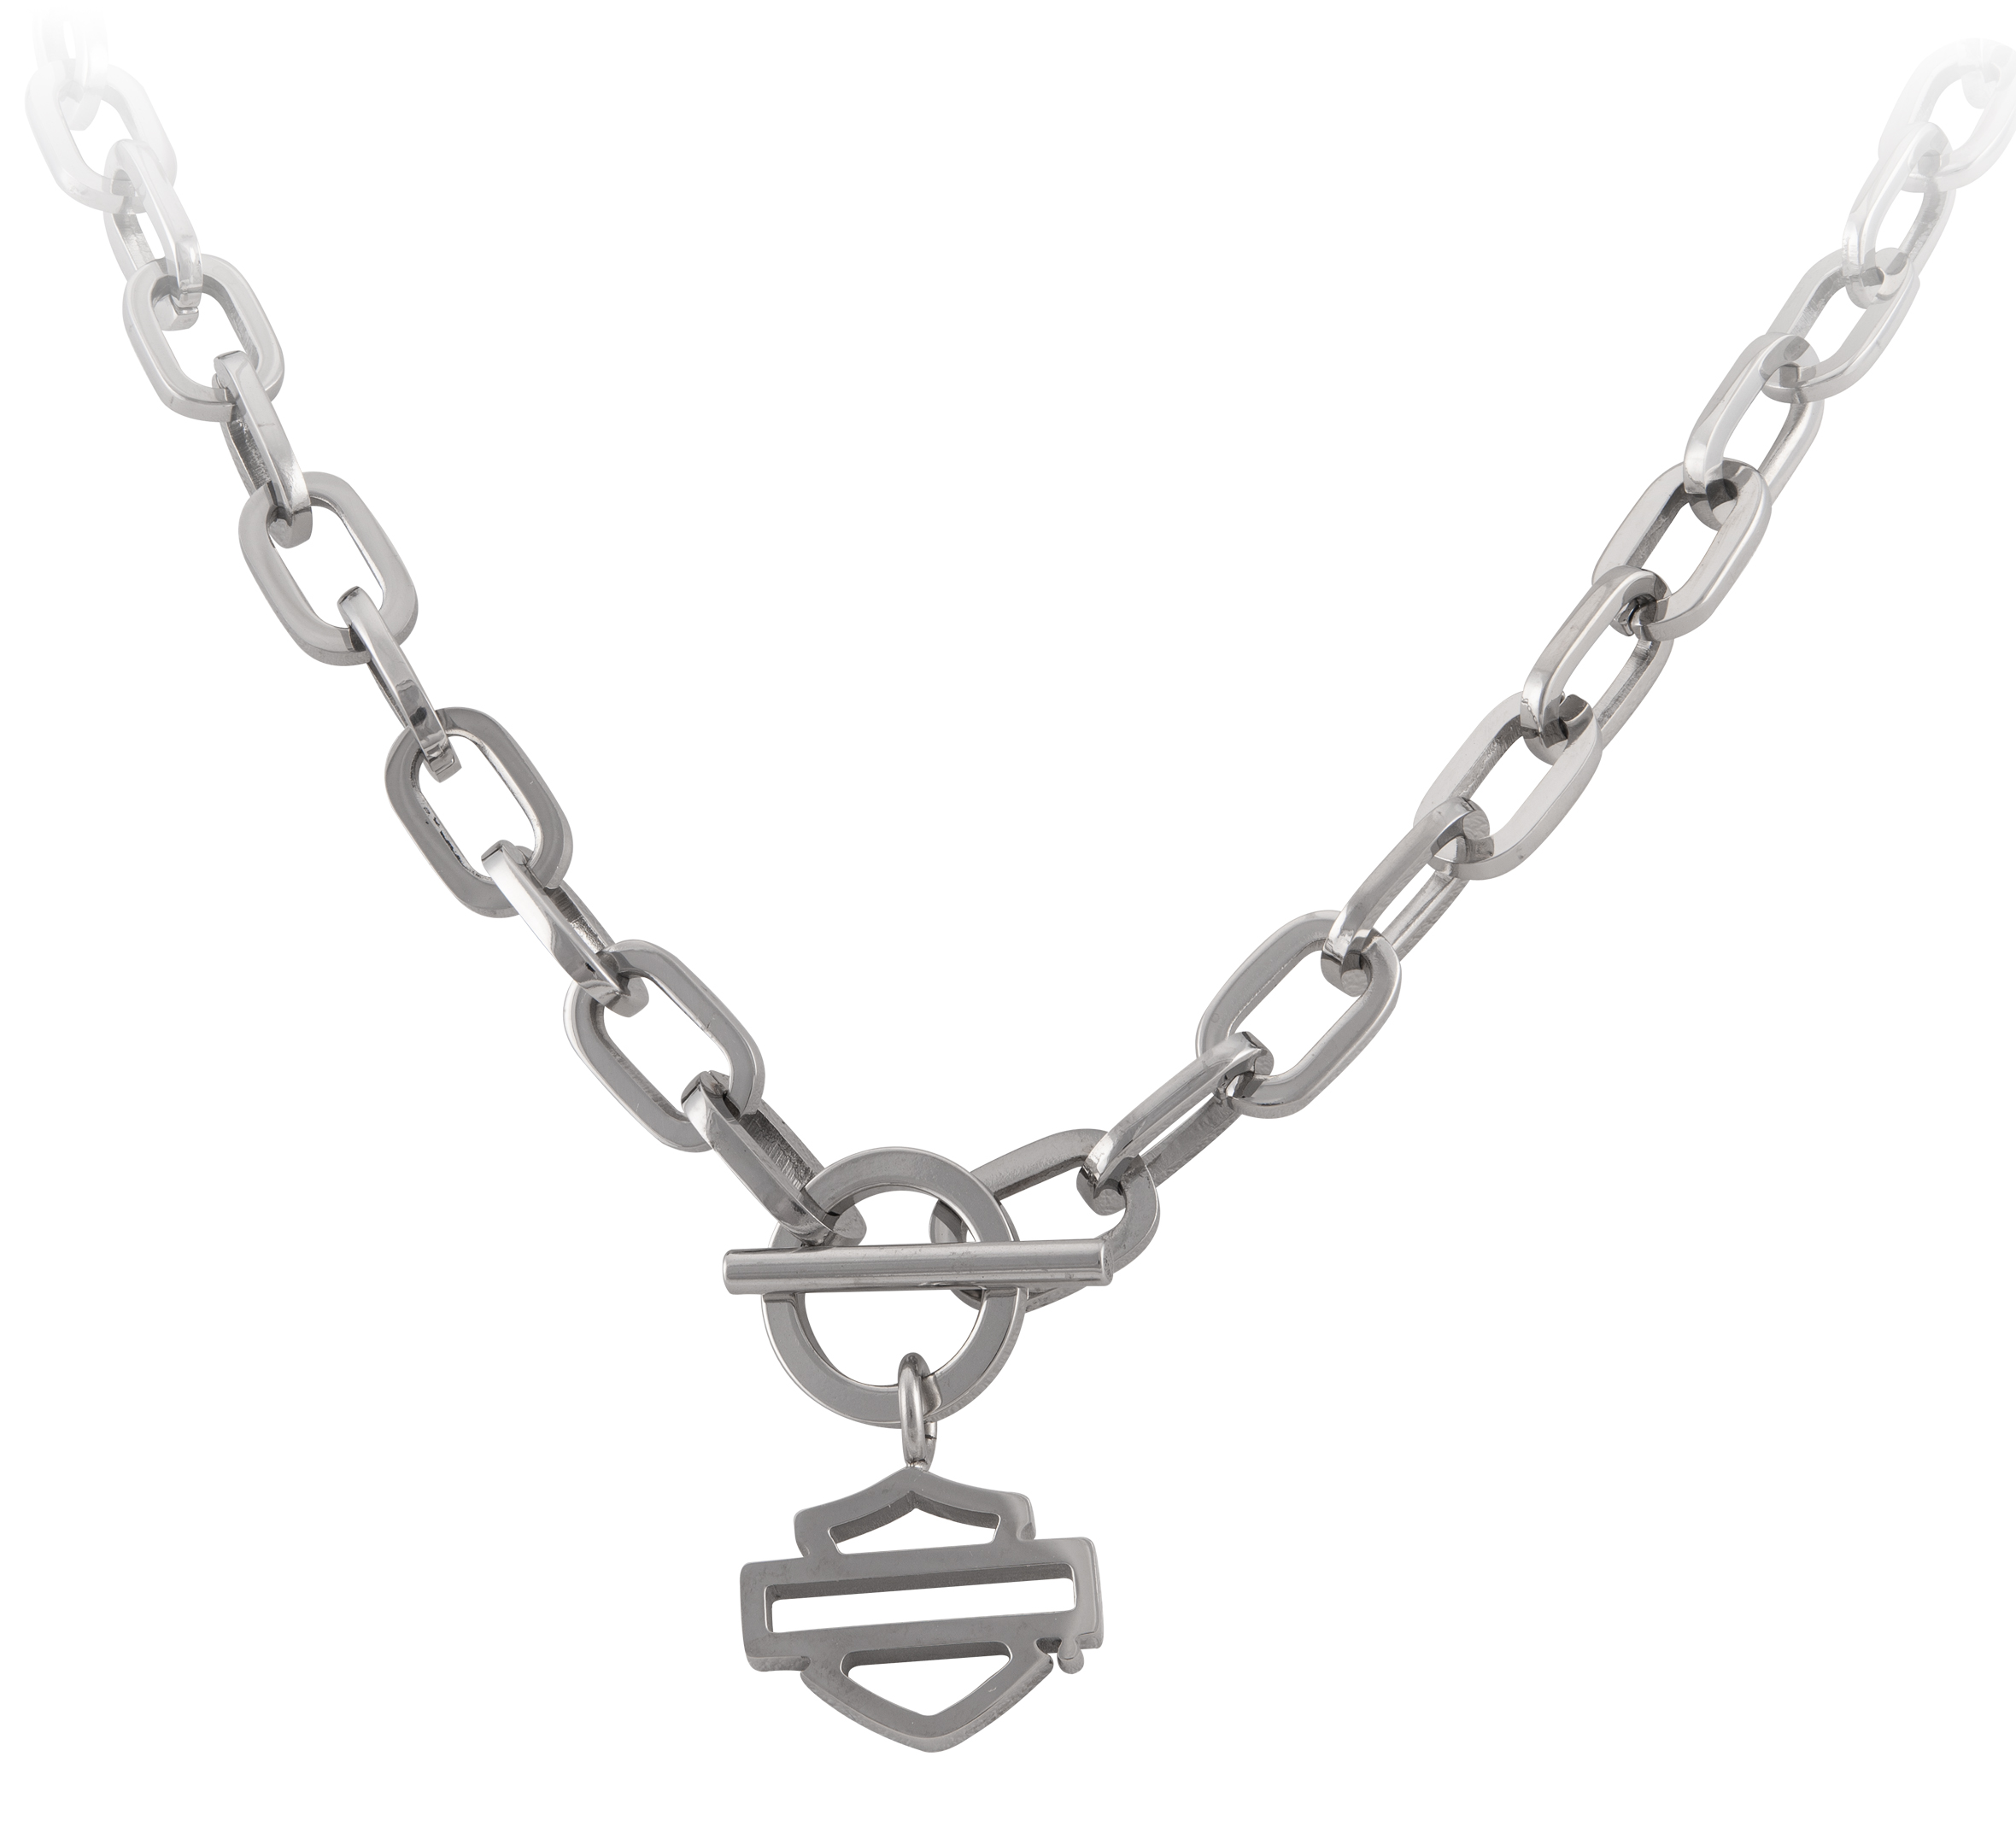 Silver cope clasp without chain nickel-free